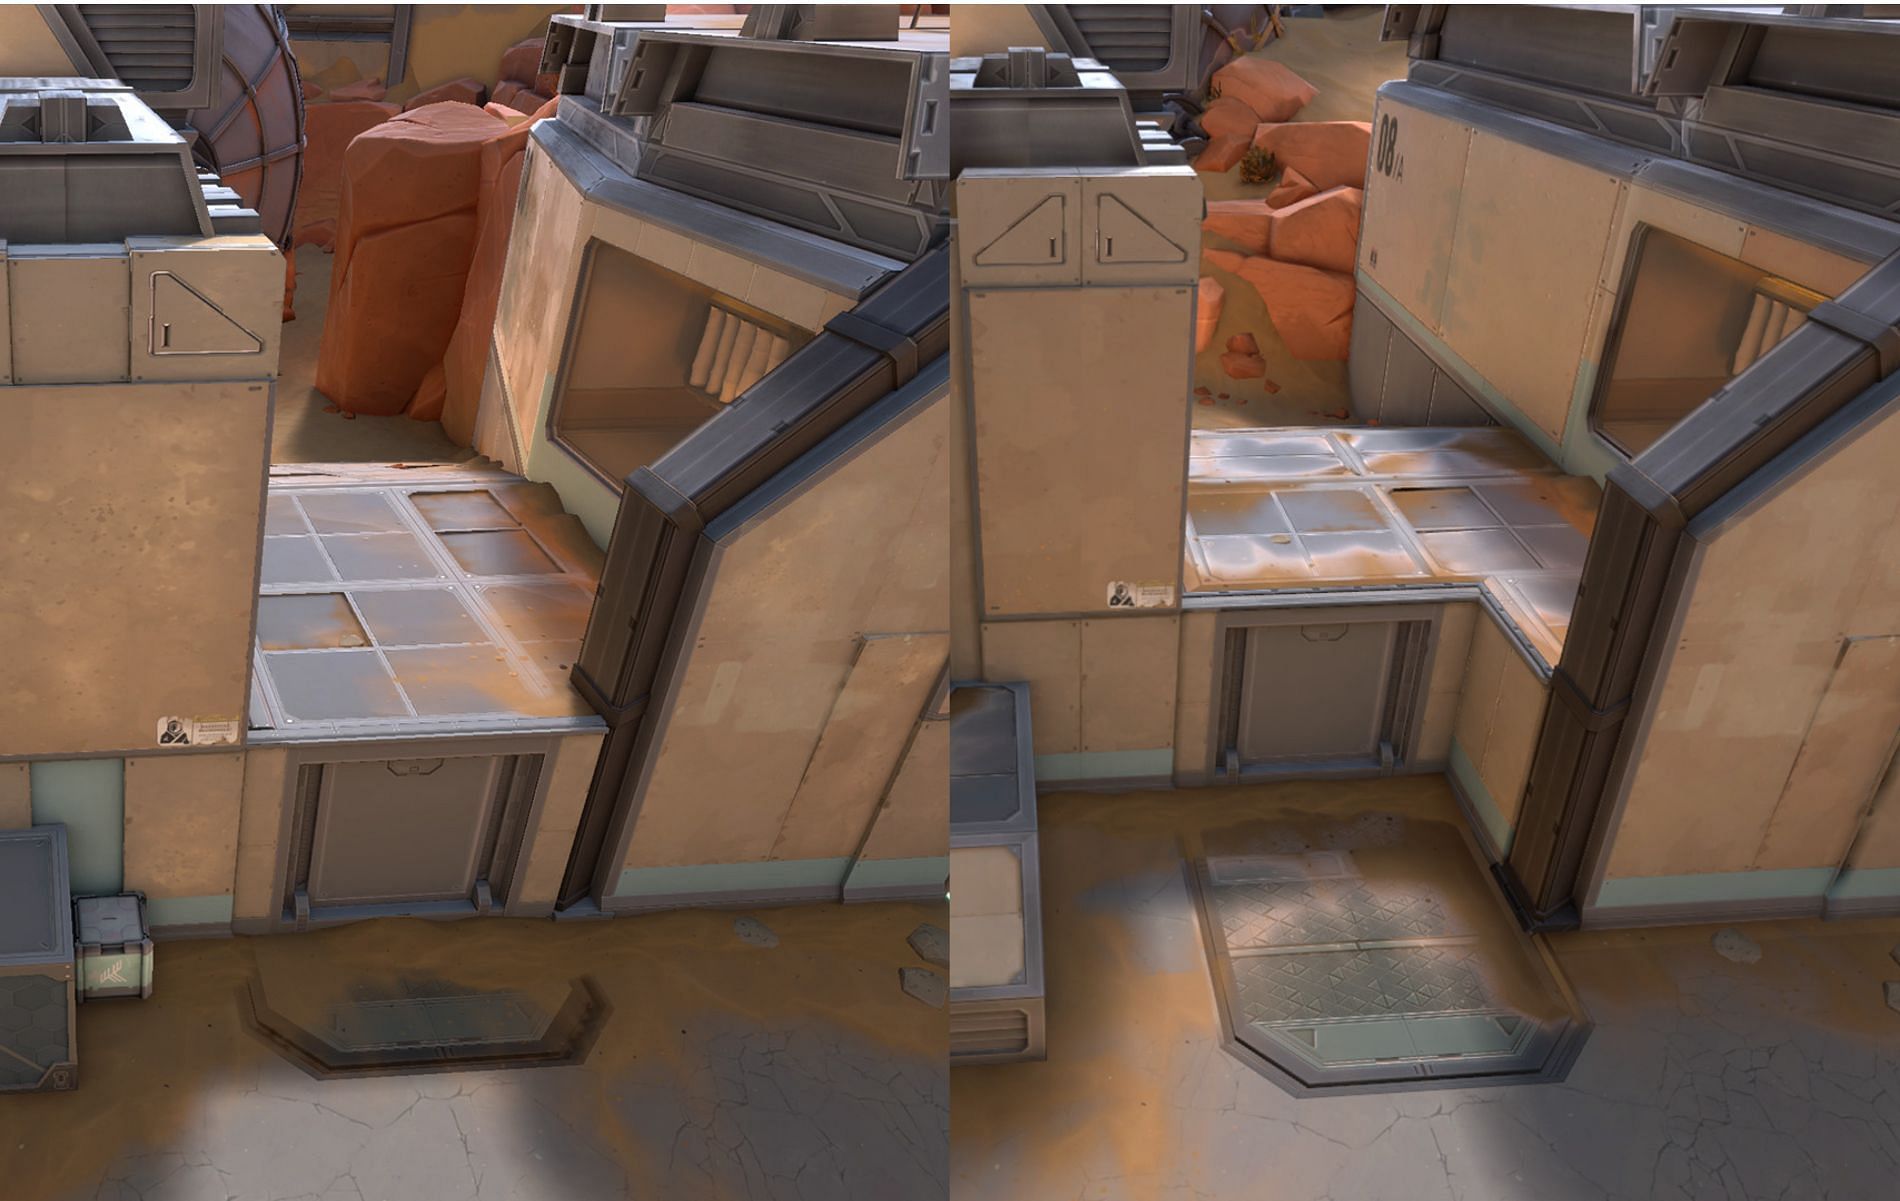 Before/After (Image via Riot Games)